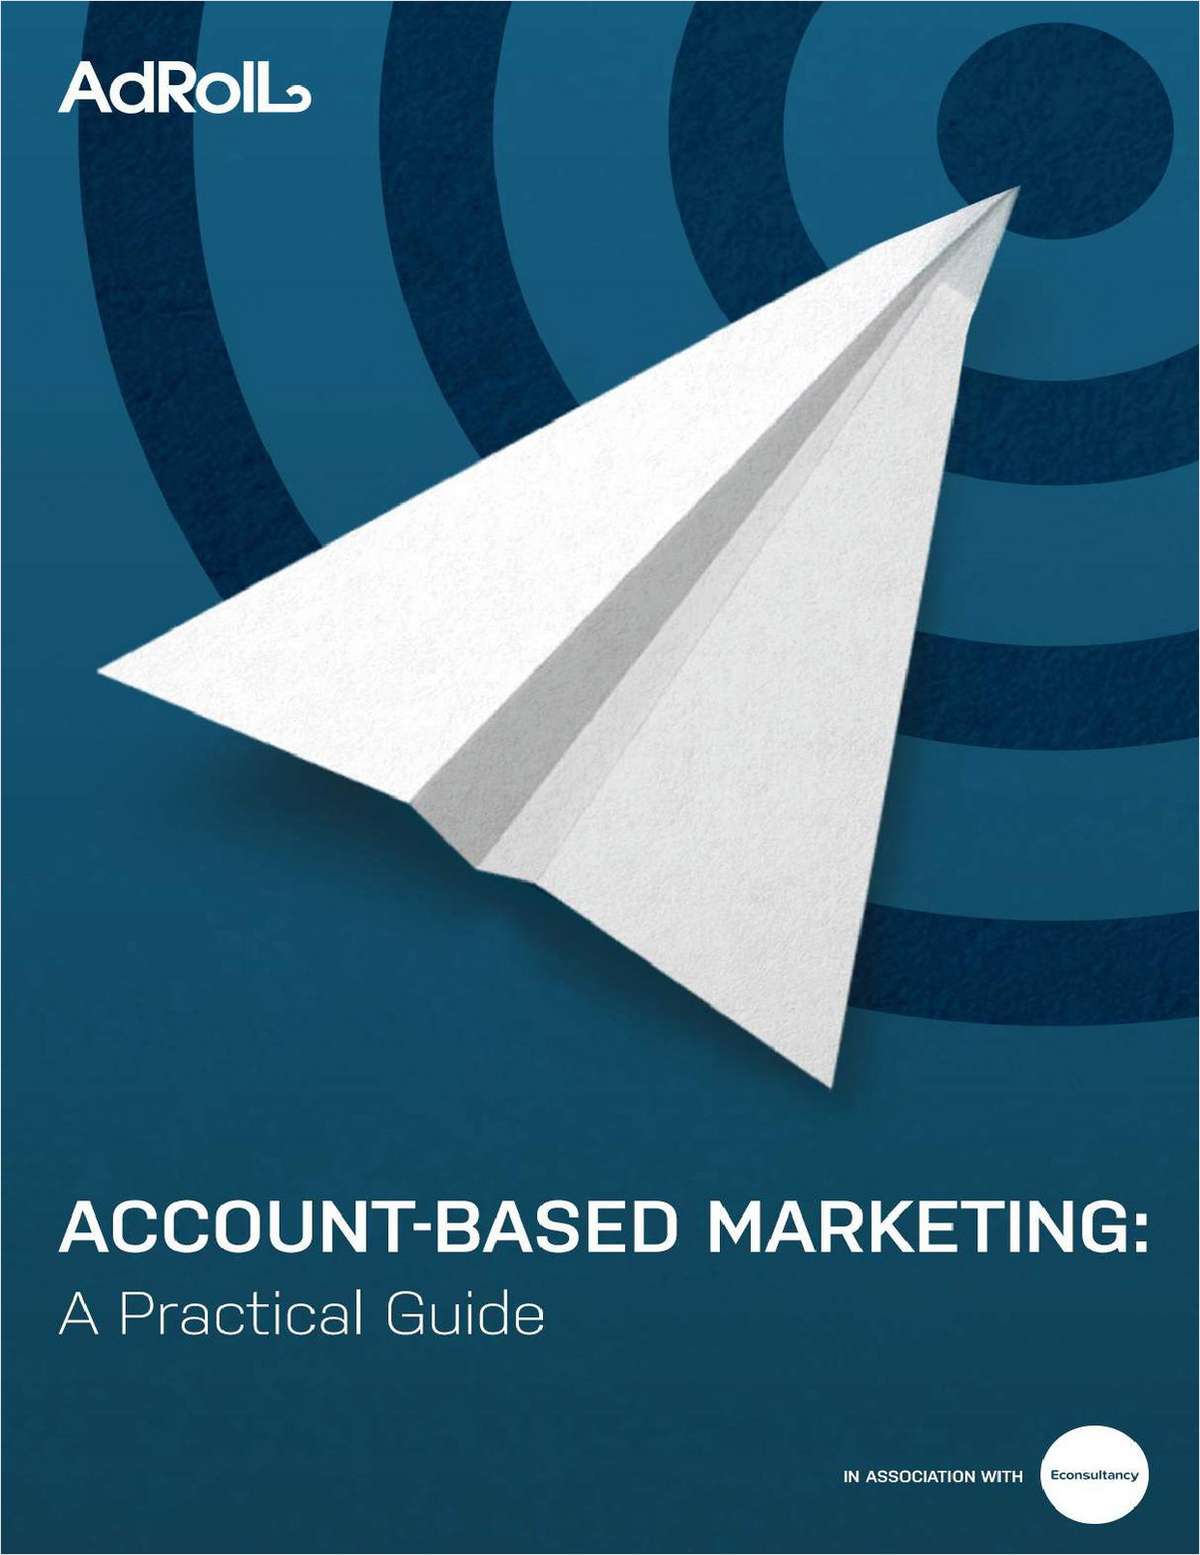 Account-Based Marketing: A Practical Guide